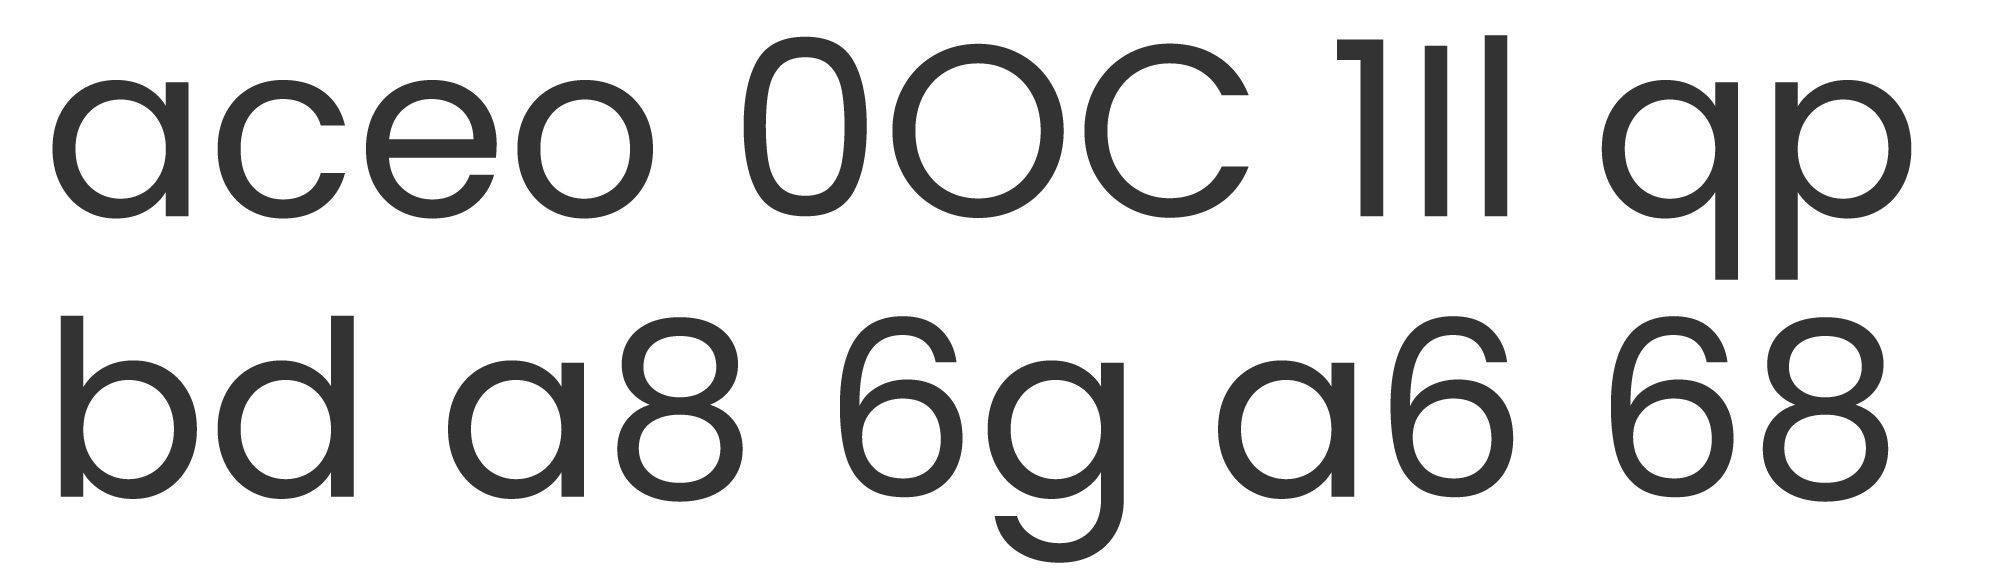 A series of similar characters from the Poppins font, including: aceo, 0OC, 1Il, qp, bd, a8, 6g, a6, and 68